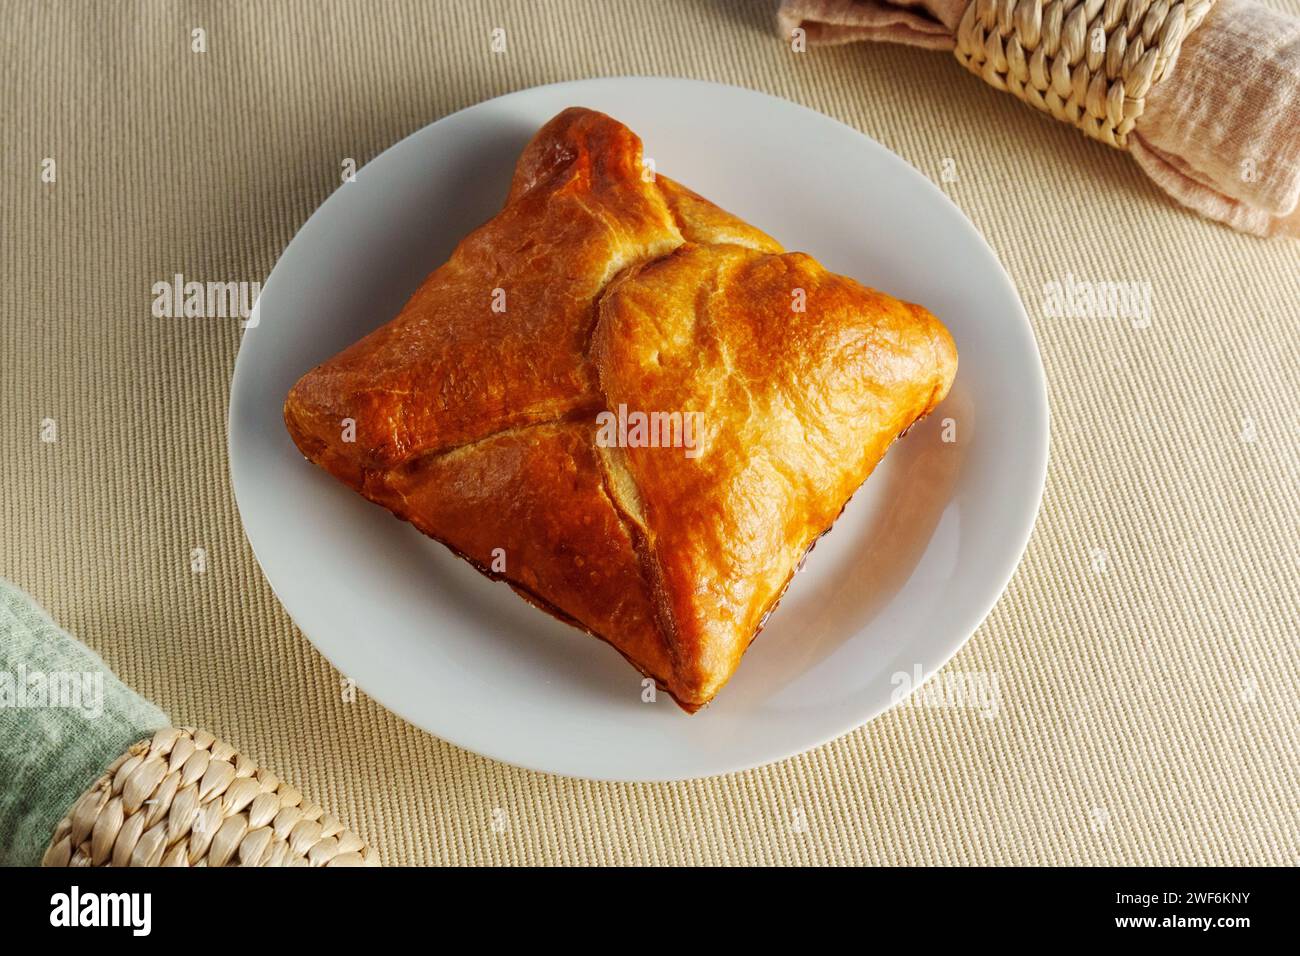 Delicate Delights: A Flaky Puff Pastry Placed Elegantly on a Gleaming White Plate Stock Photo